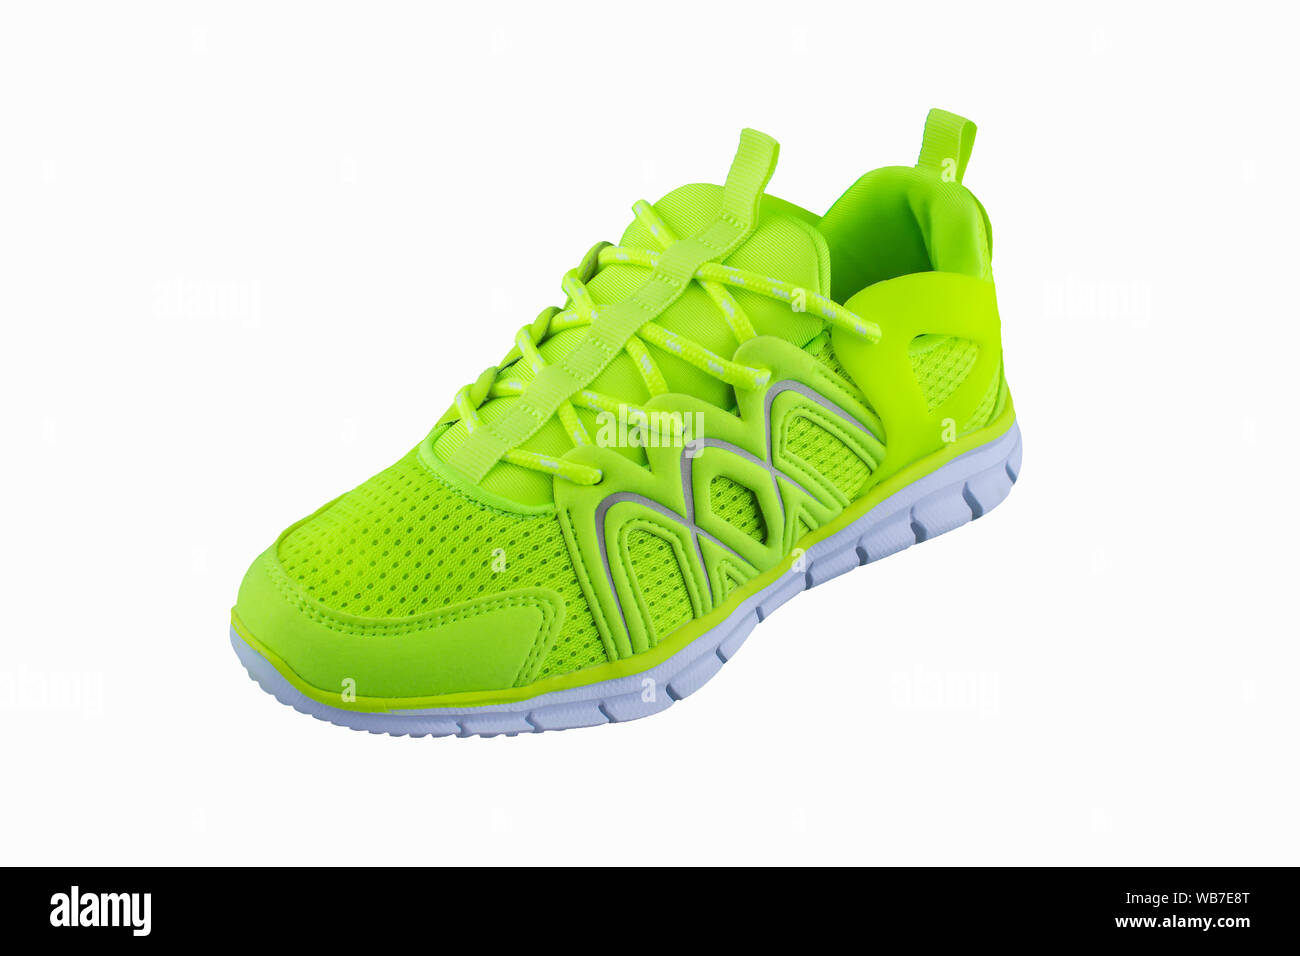 bright green shoes